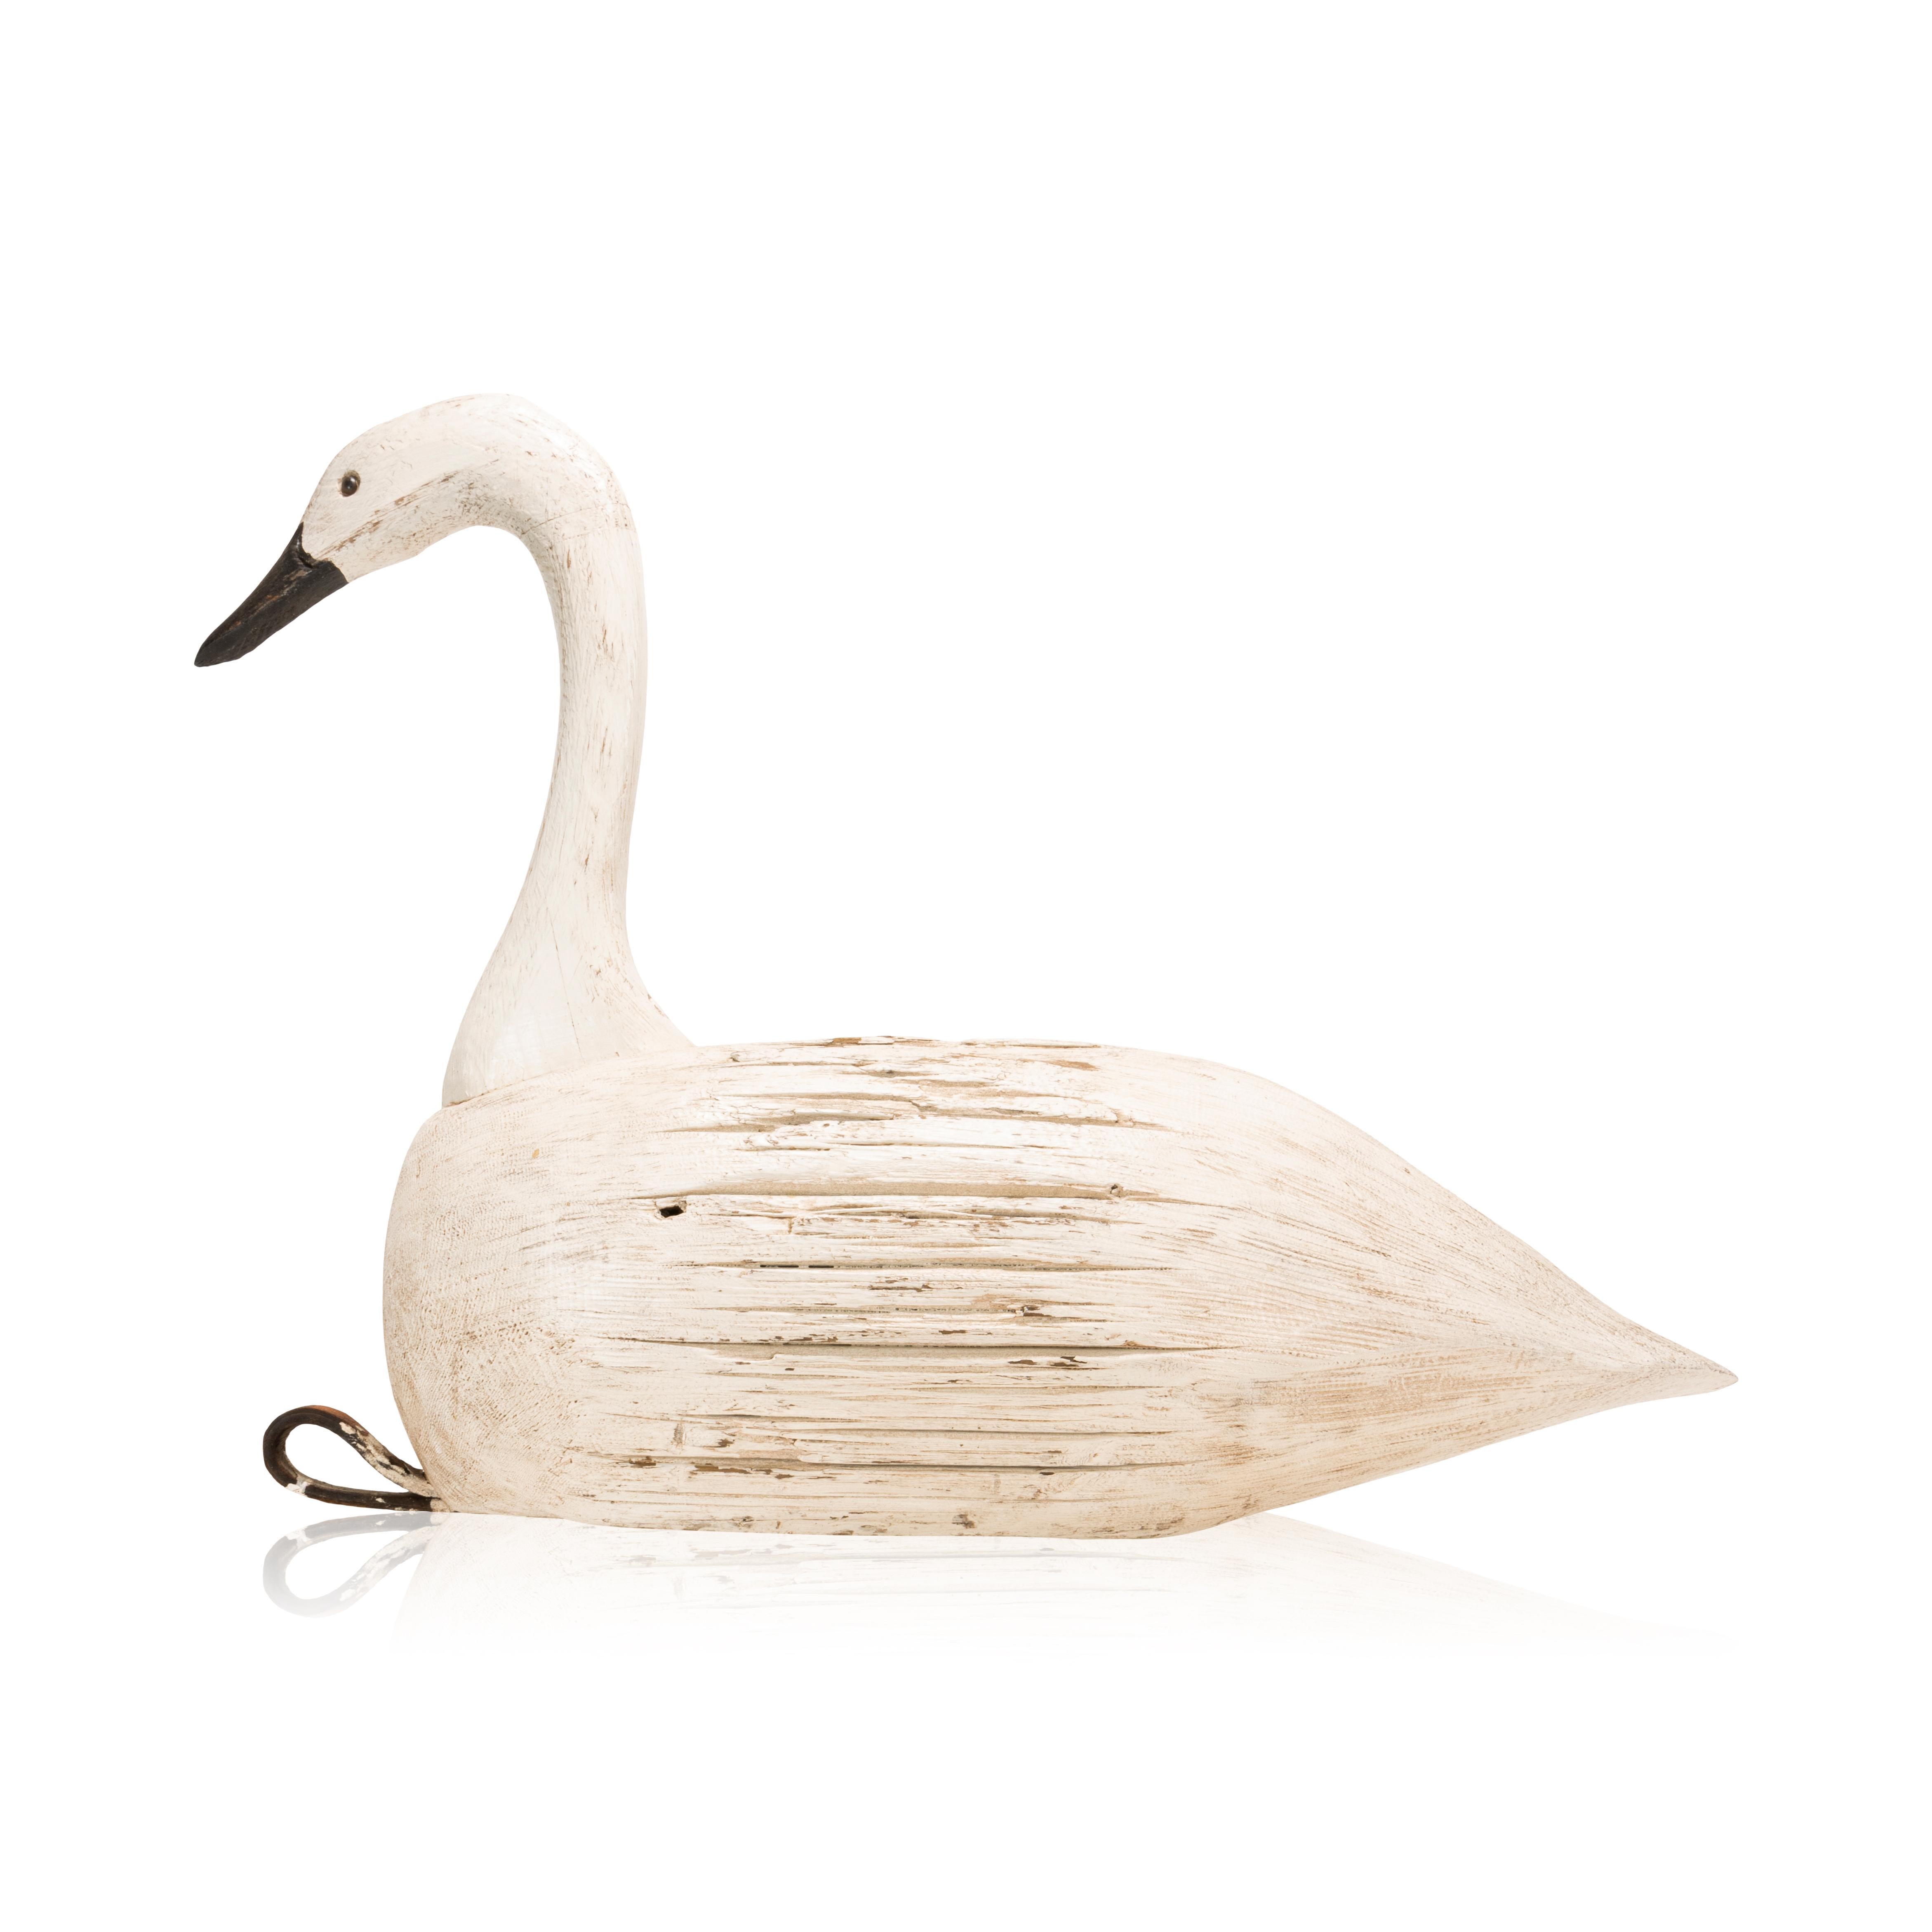 Decorative swan decoy carved from a barn beam. Glass eyes, original paint. Carver unknown. Original cream white paint.

Period: Mid-20th century
Origin: United States
Size: 25